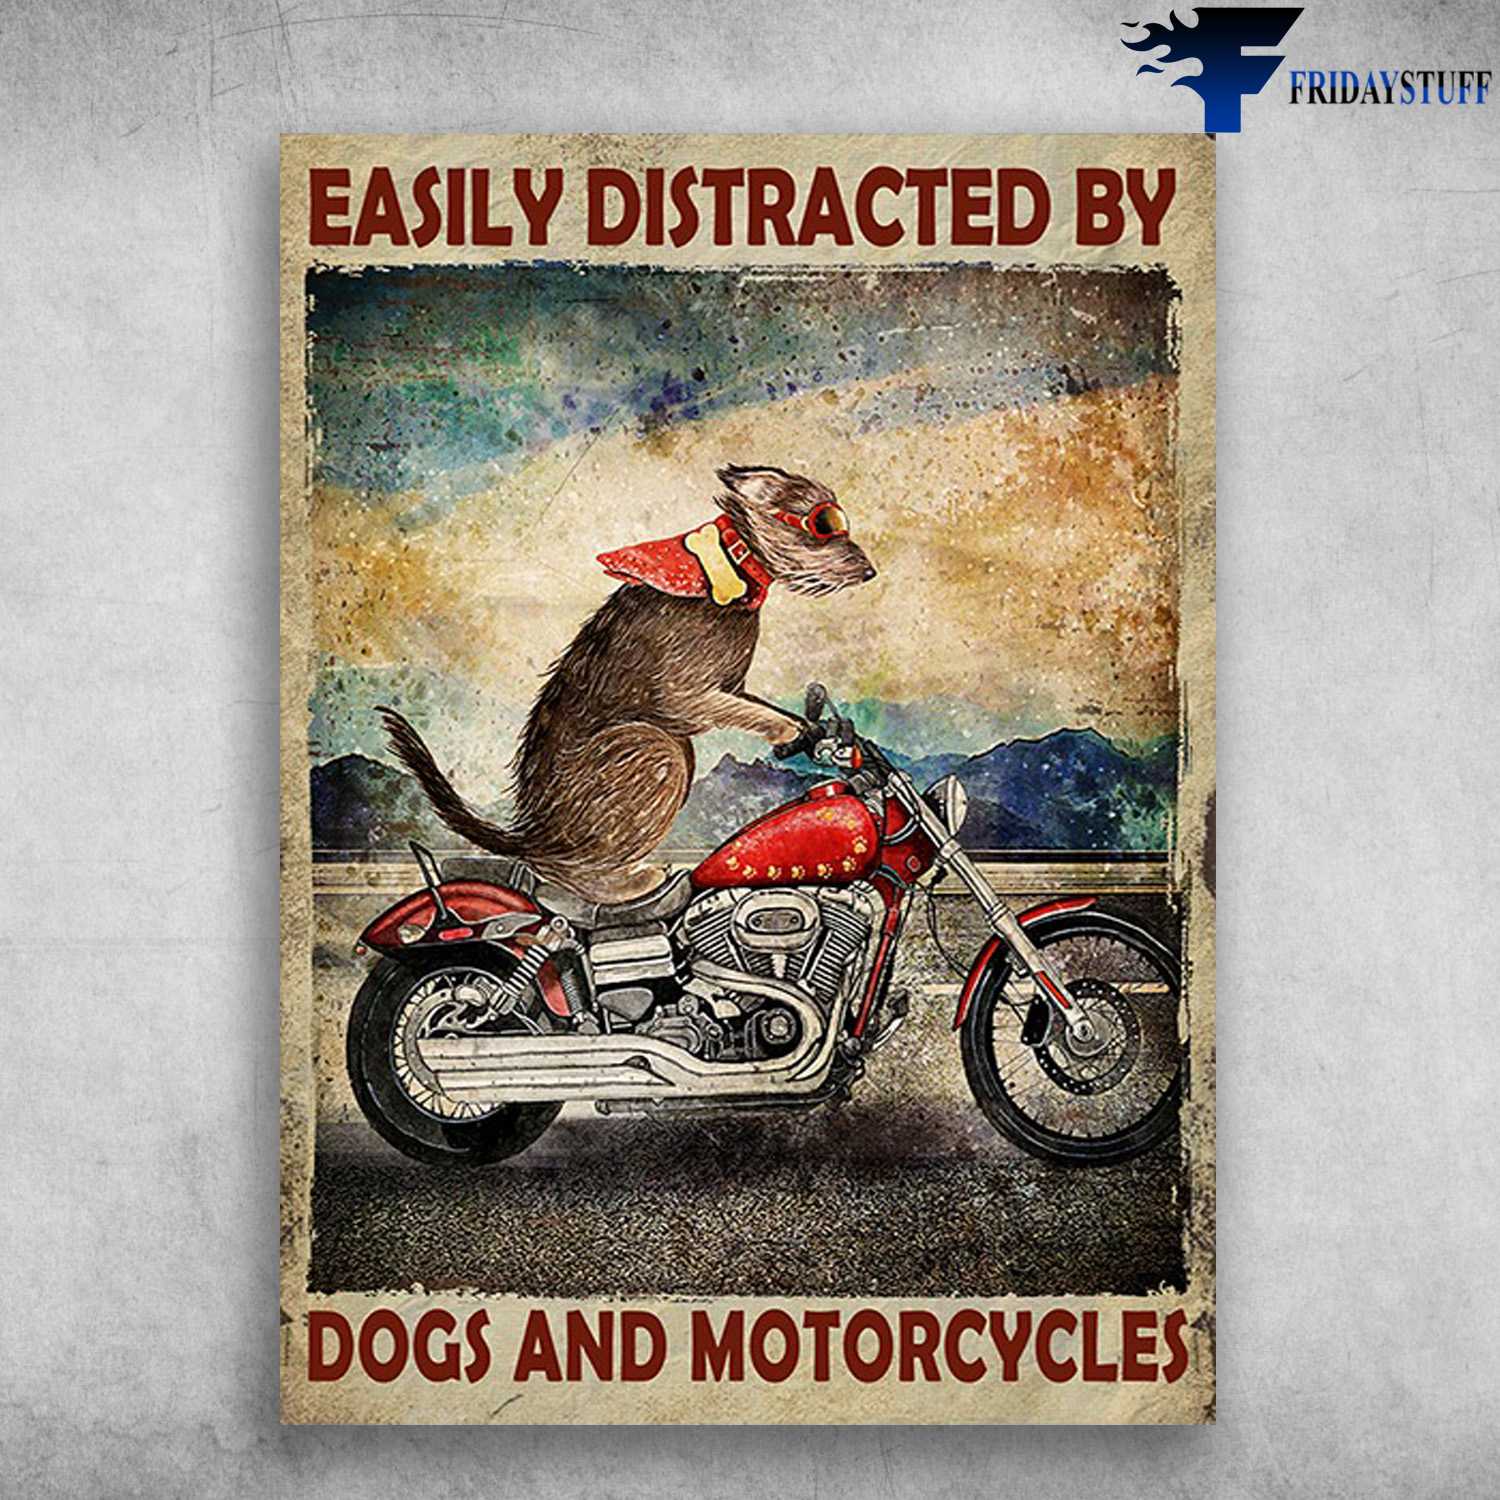 Riding Dog, Motorcycle Lover - Easily Distracted By, Dogs And Motorcycles